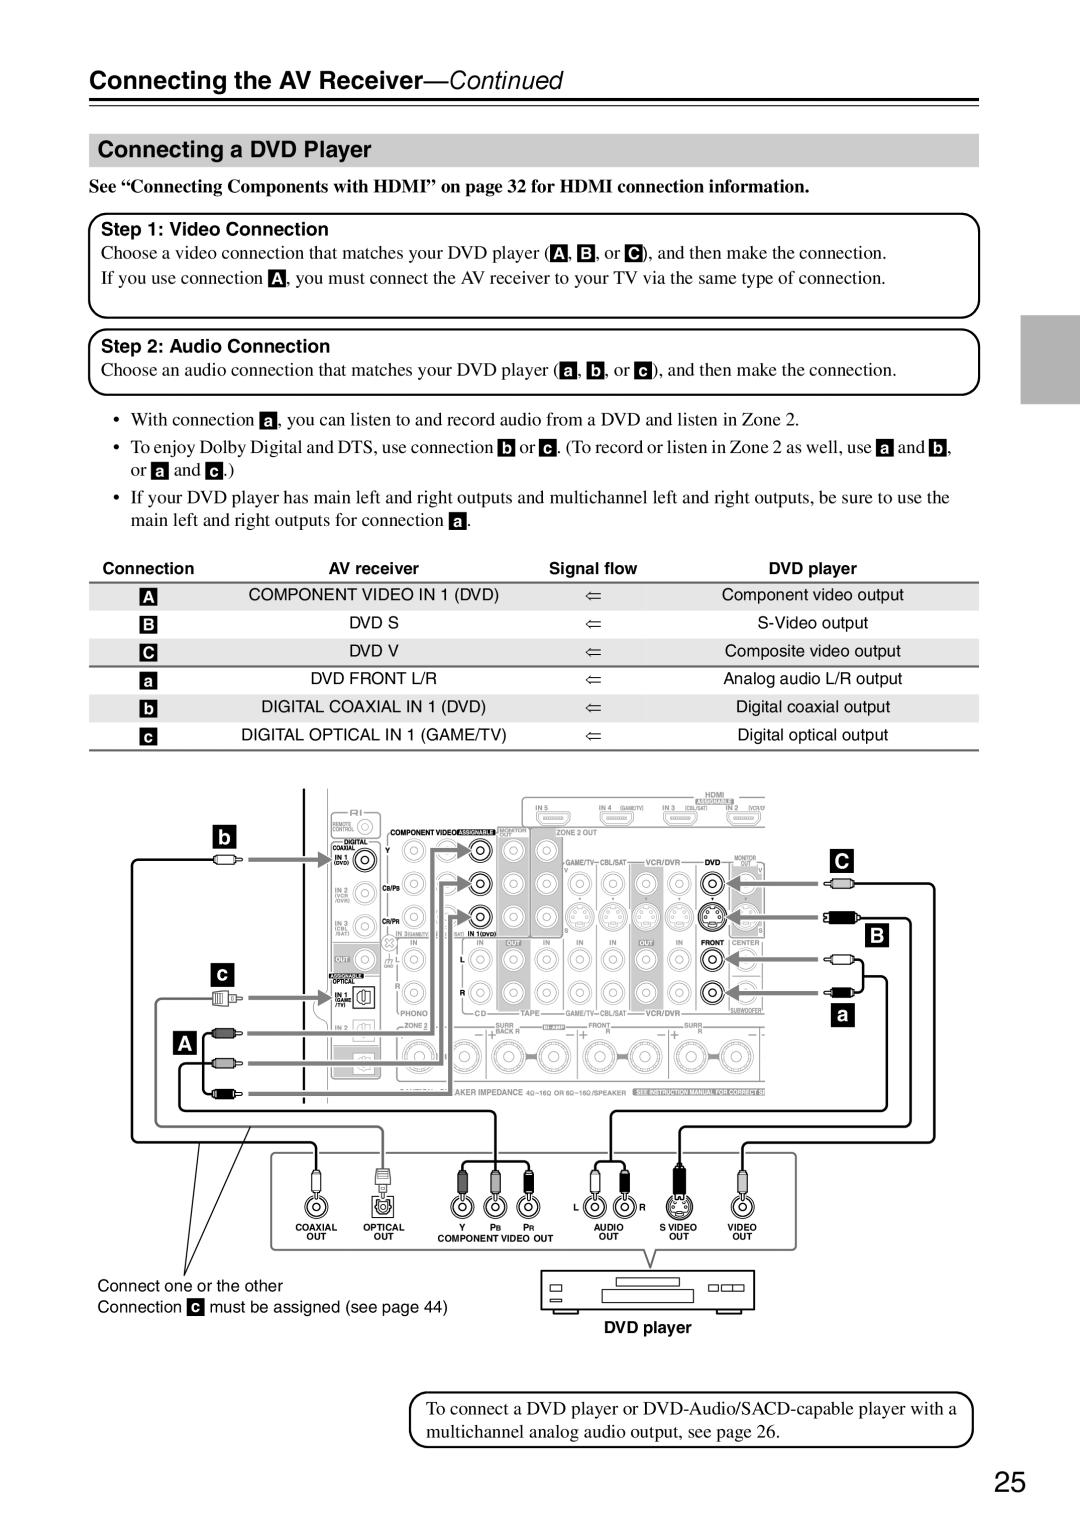 Onkyo DTR-7.9 instruction manual Connecting a DVD Player, b C B c, Connecting the AV Receiver—Continued 